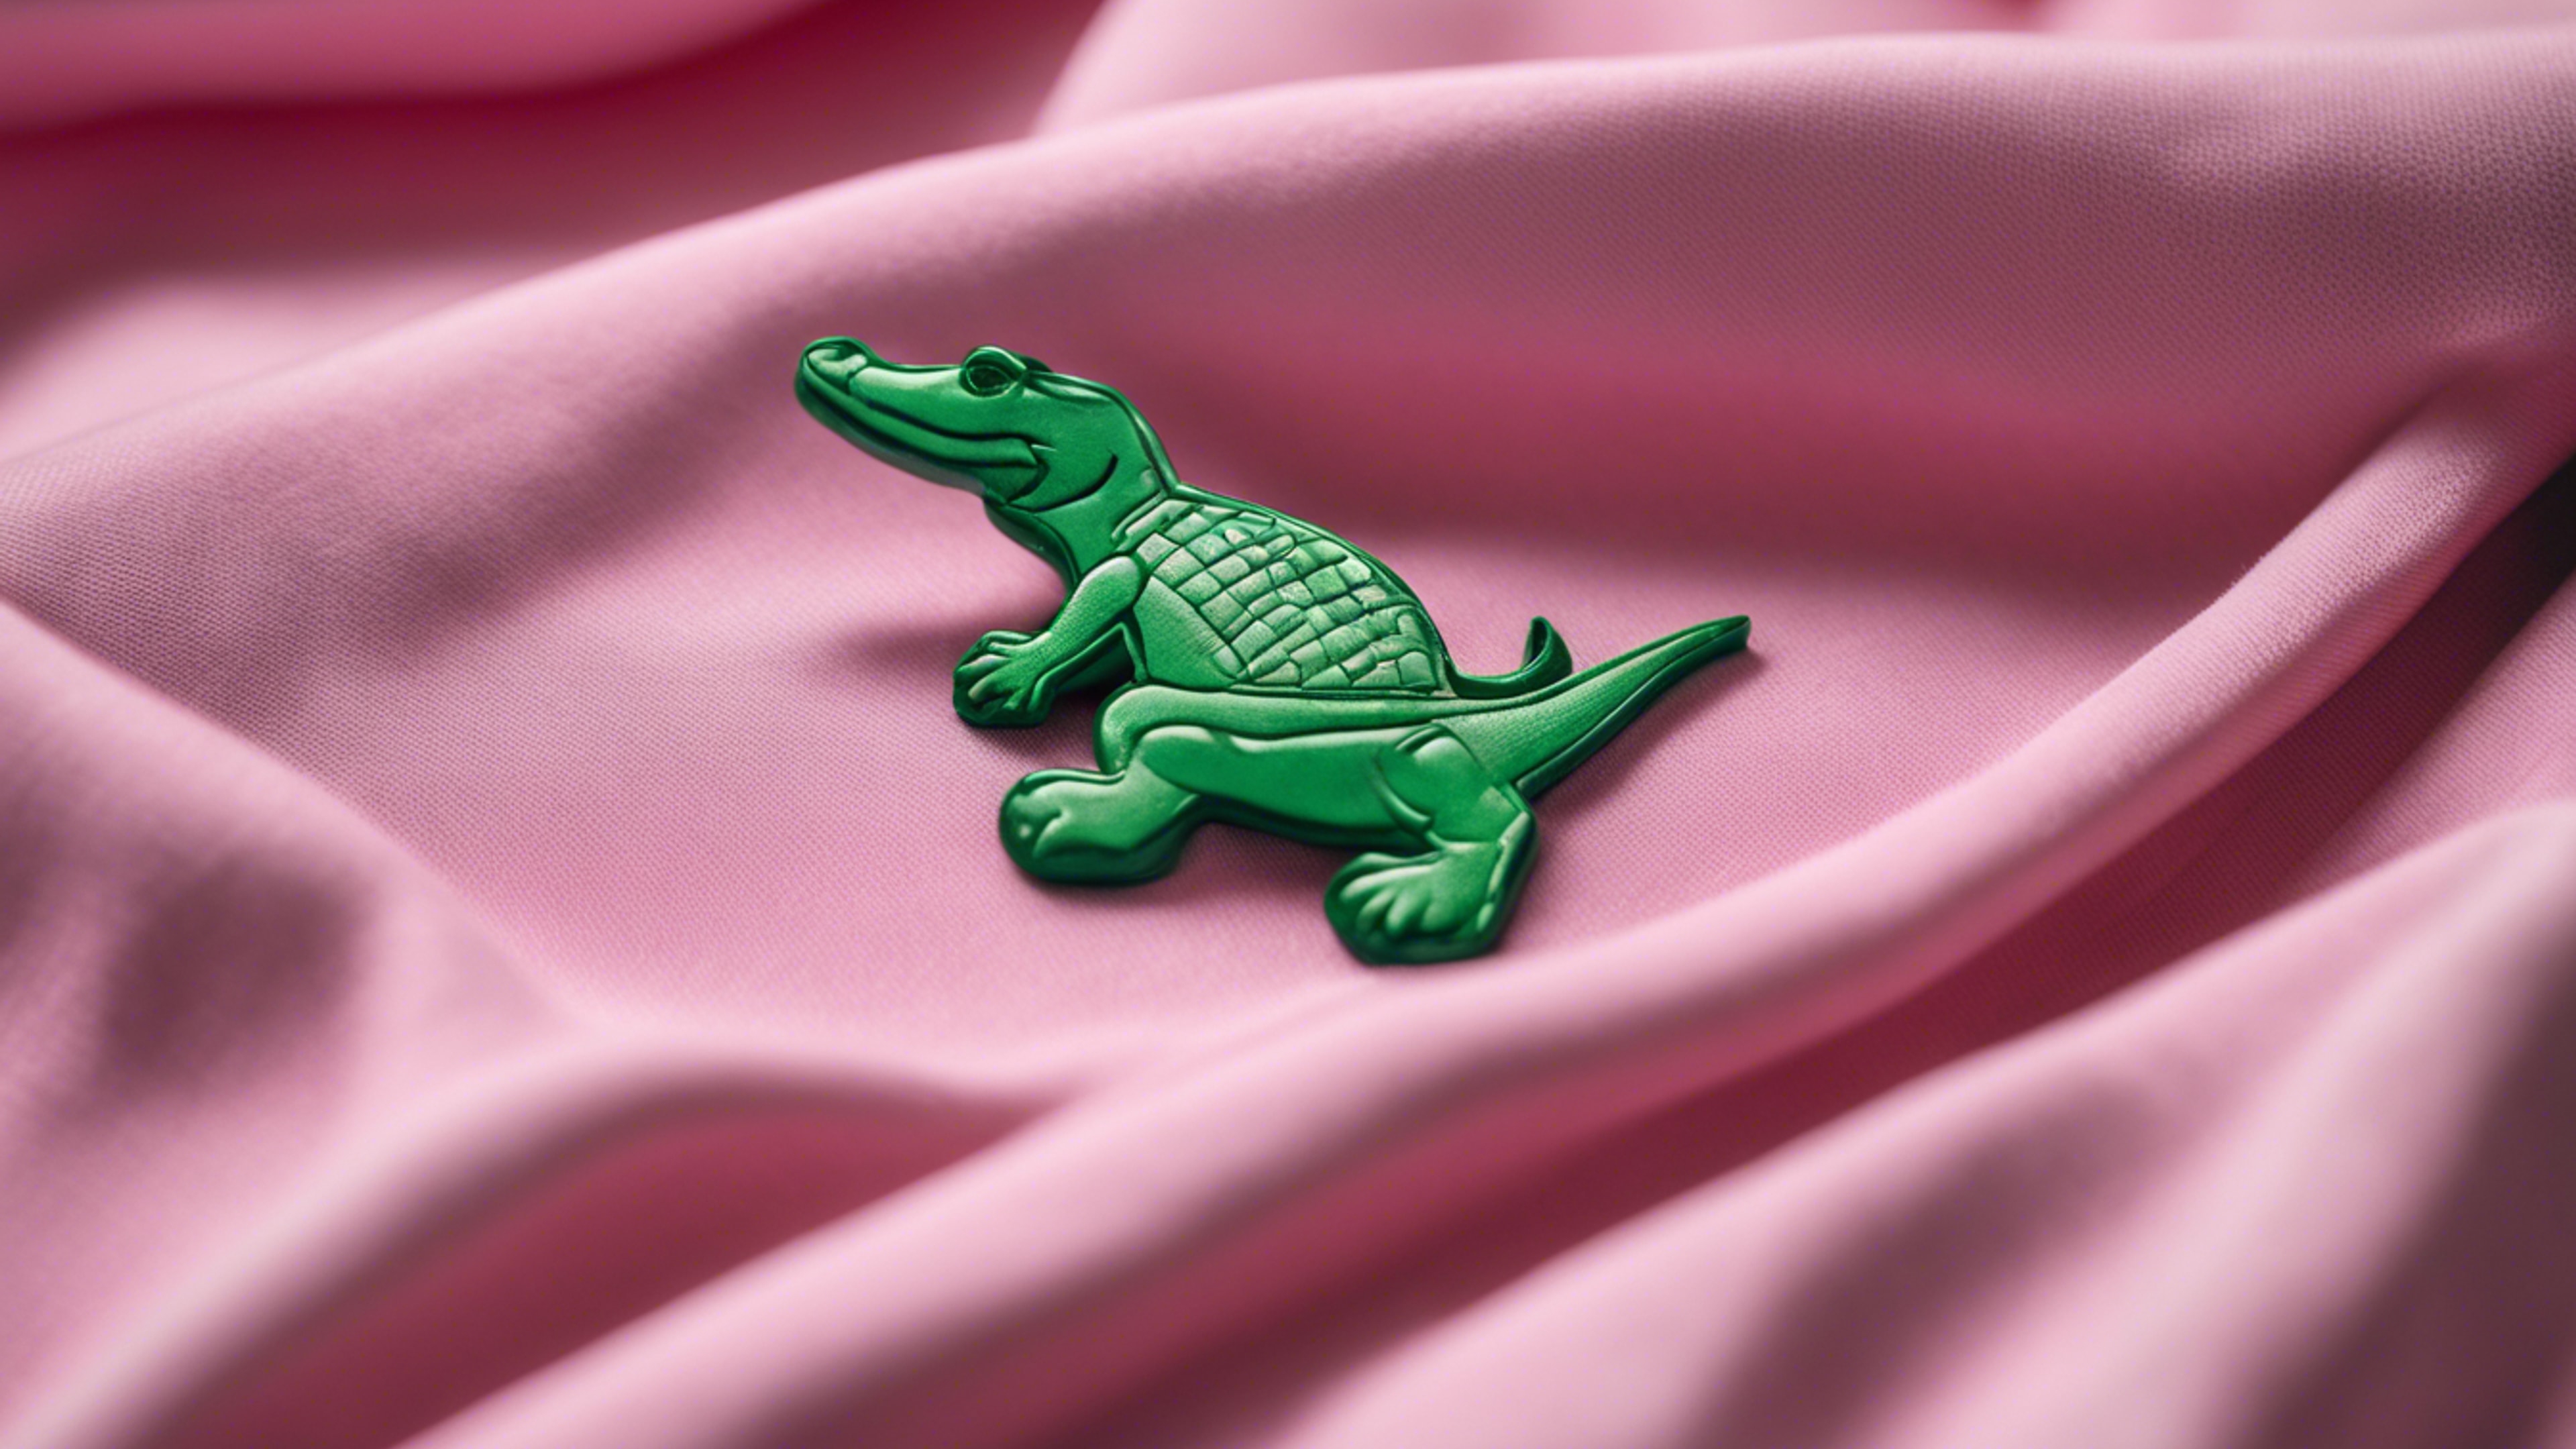 A pink polo shirt with a green alligator logo, folded neatly on a bed. Тапет[63d9ff960abf421e89a8]